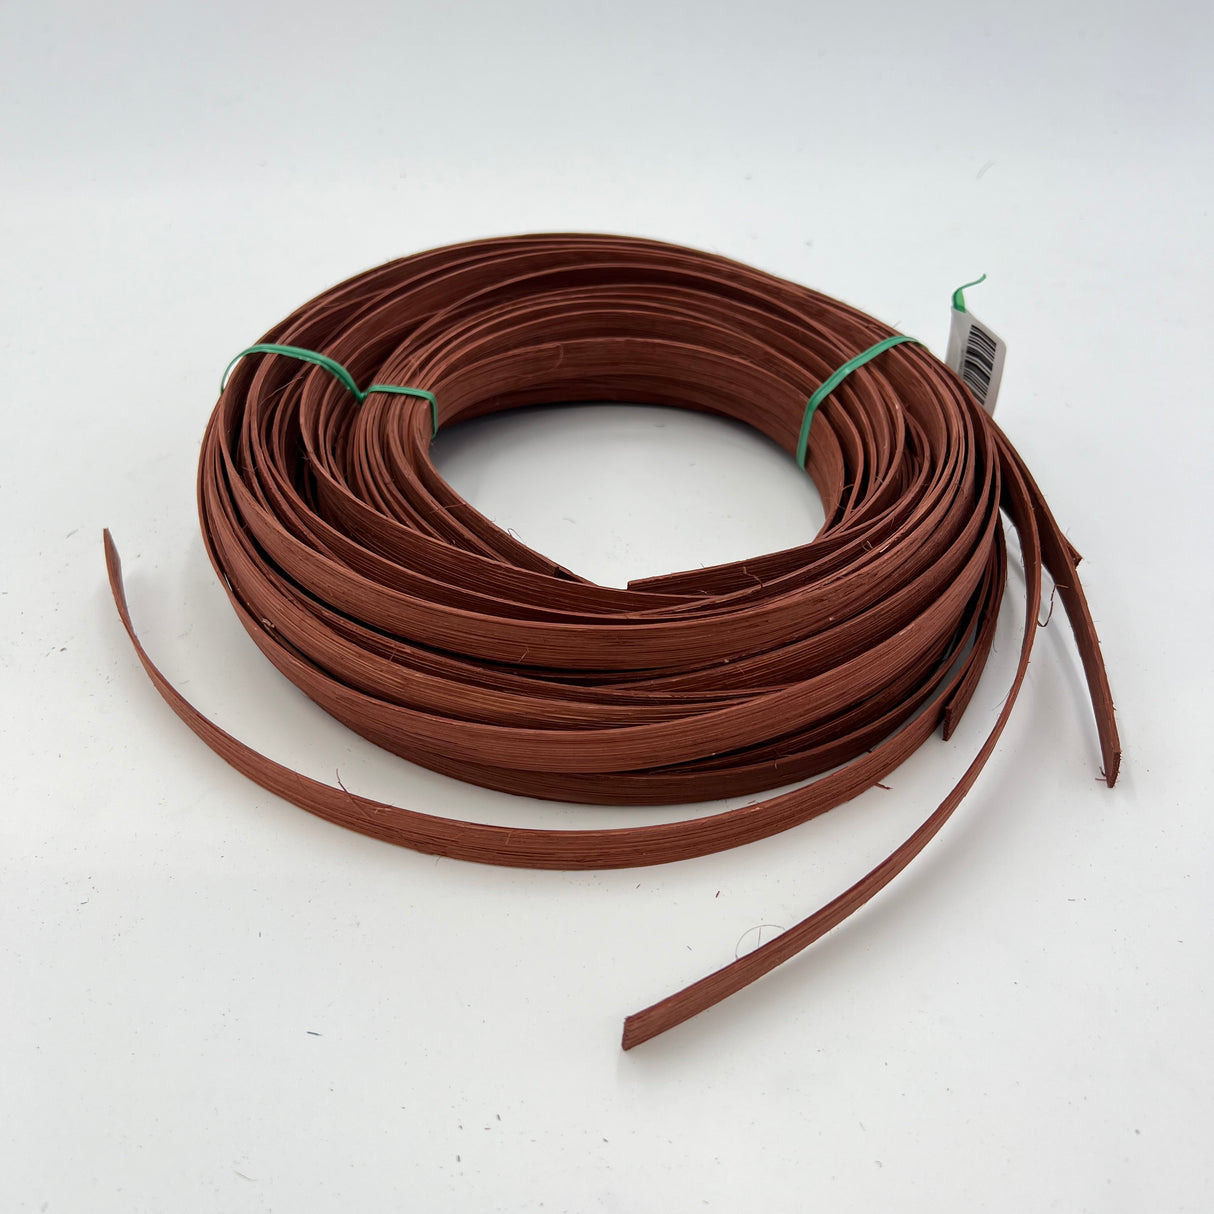 Rust Brown - 1/2" Flat - Dyed Reed (1/2 lb coil)